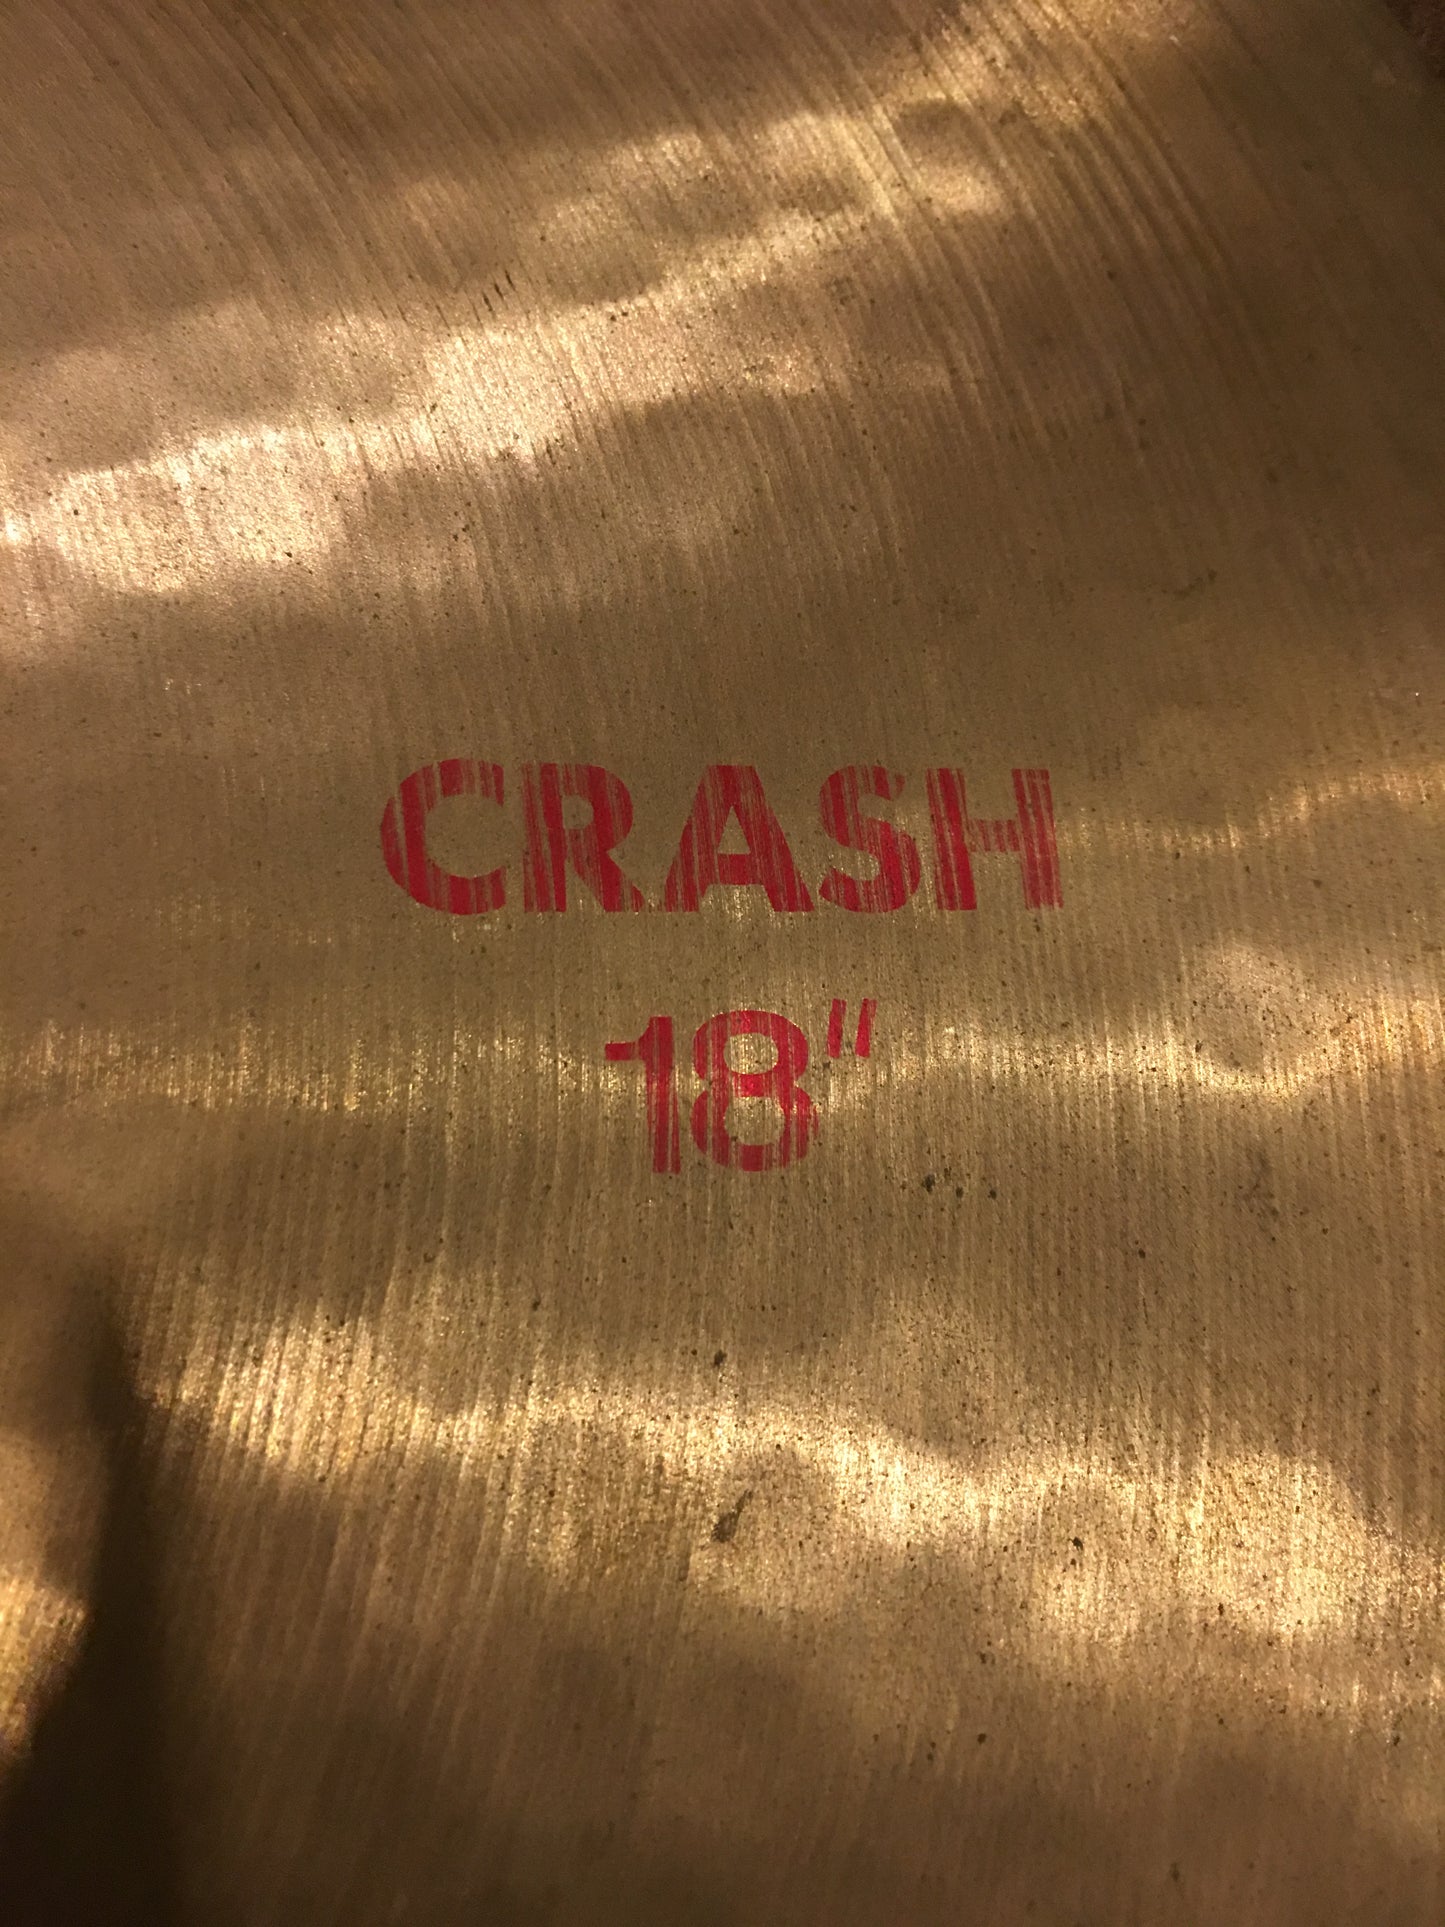 18" Pasite 2002 Crash Cymbal 1983 Red Label 1505g #484